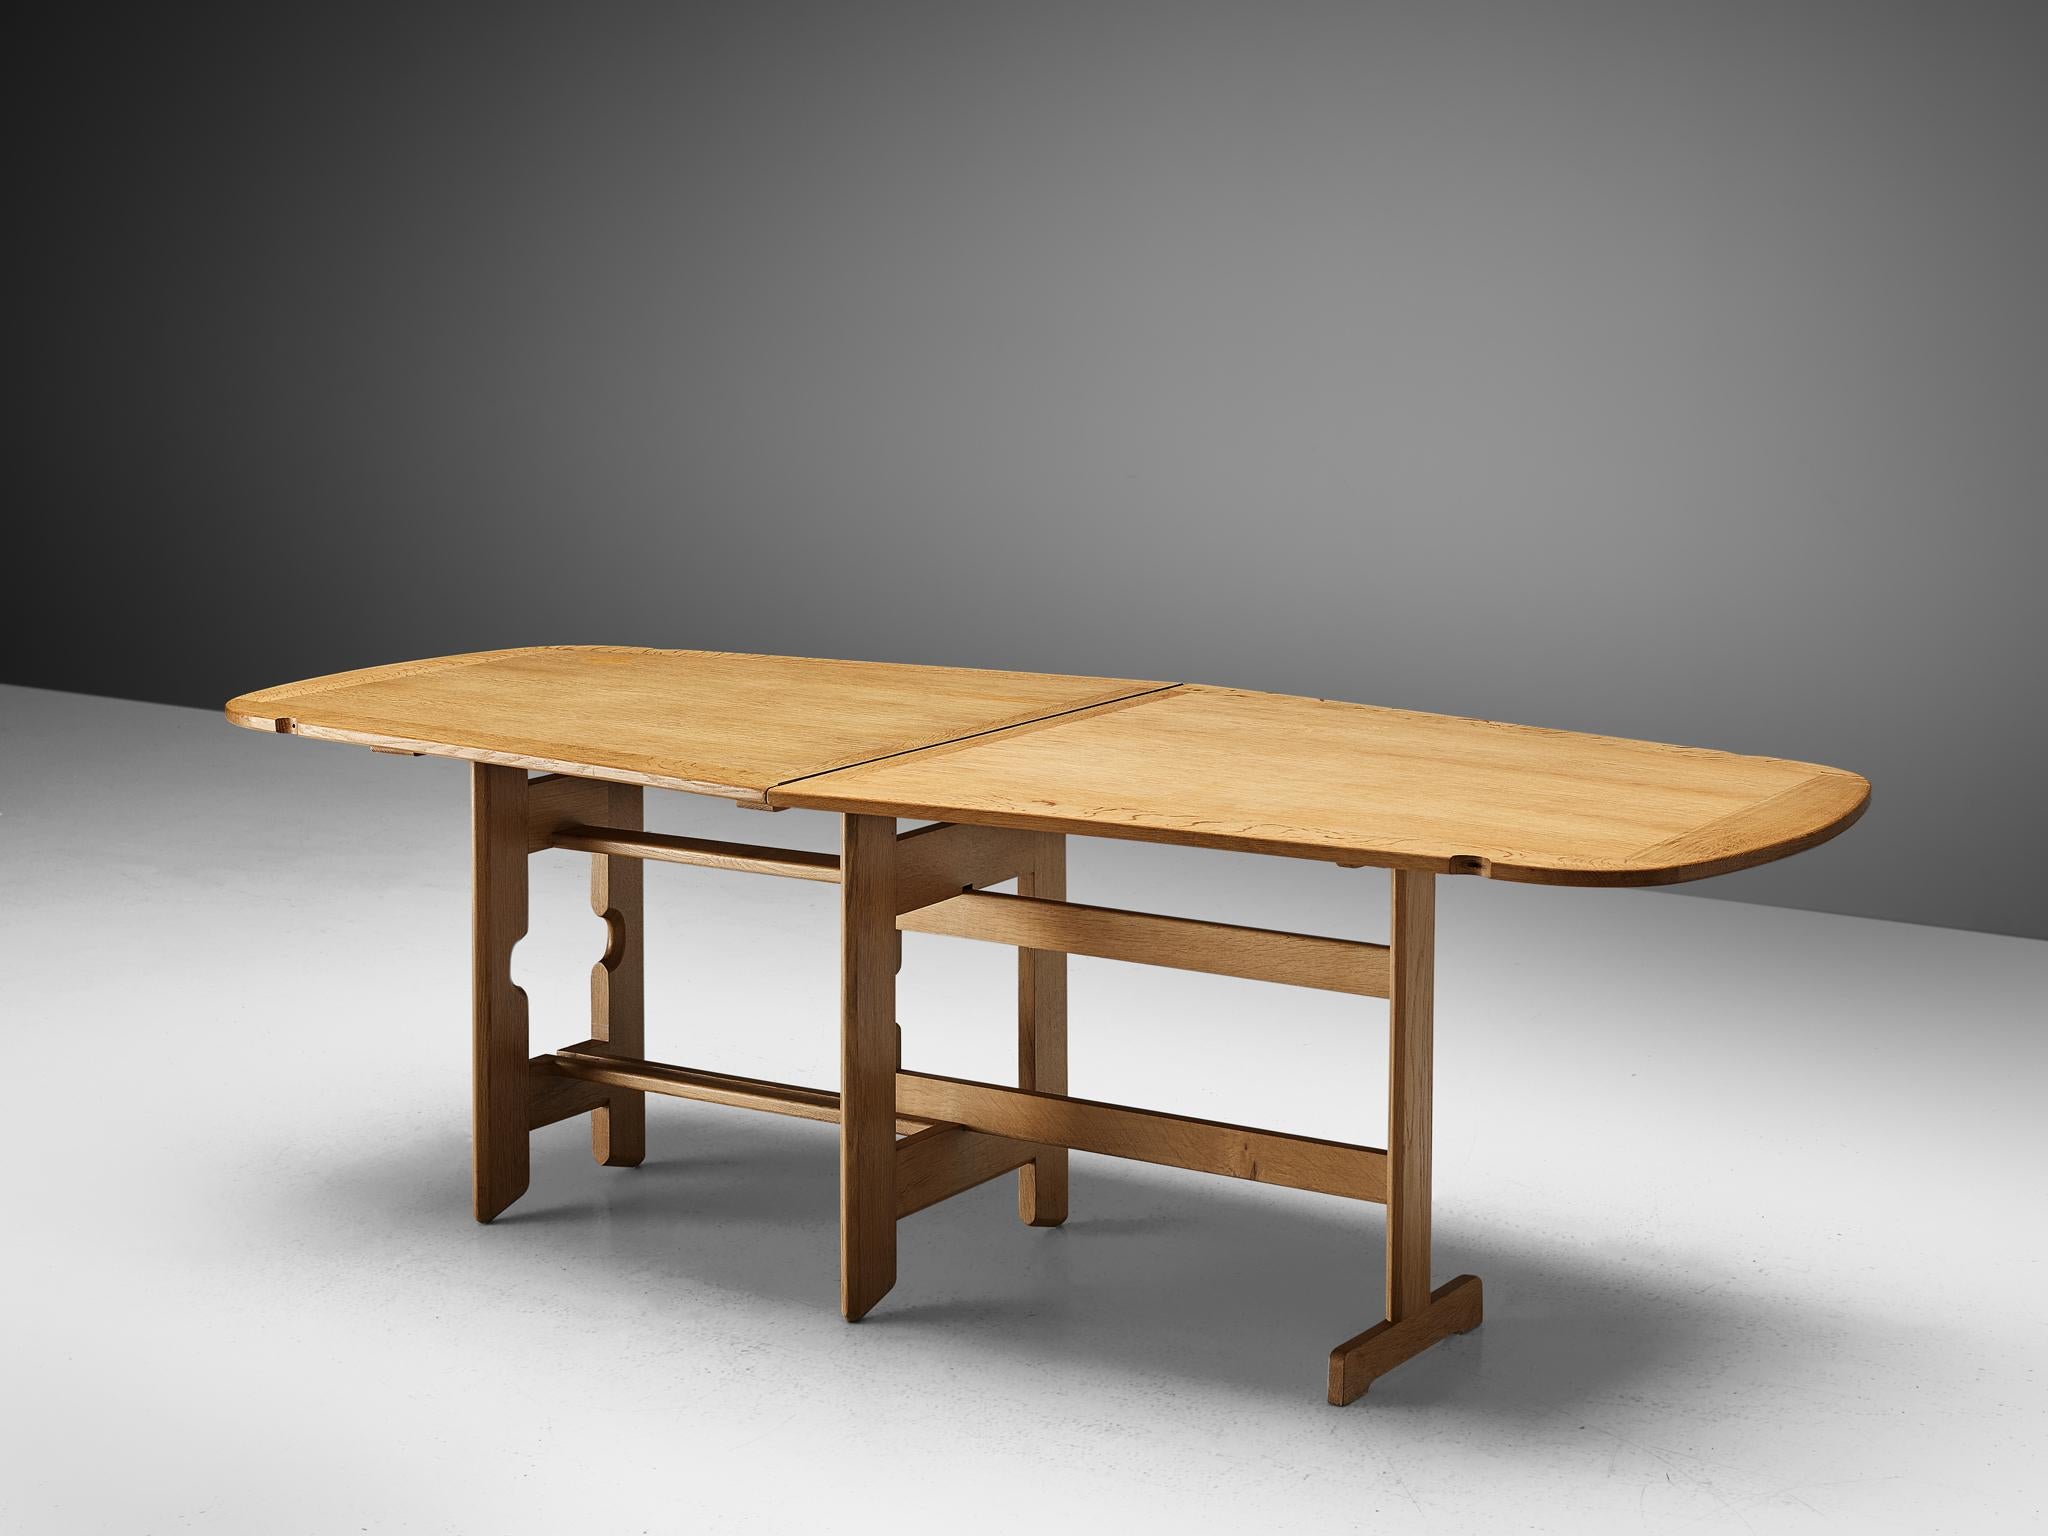 Guillerme et Chambron, drop-leaf dining table, oak, 1960s.

Large freeform shaped dining table with inlayed top. This table is perfect to place against a wall, or for additional seat placed free in the interior thanks to the drop-leaf. The